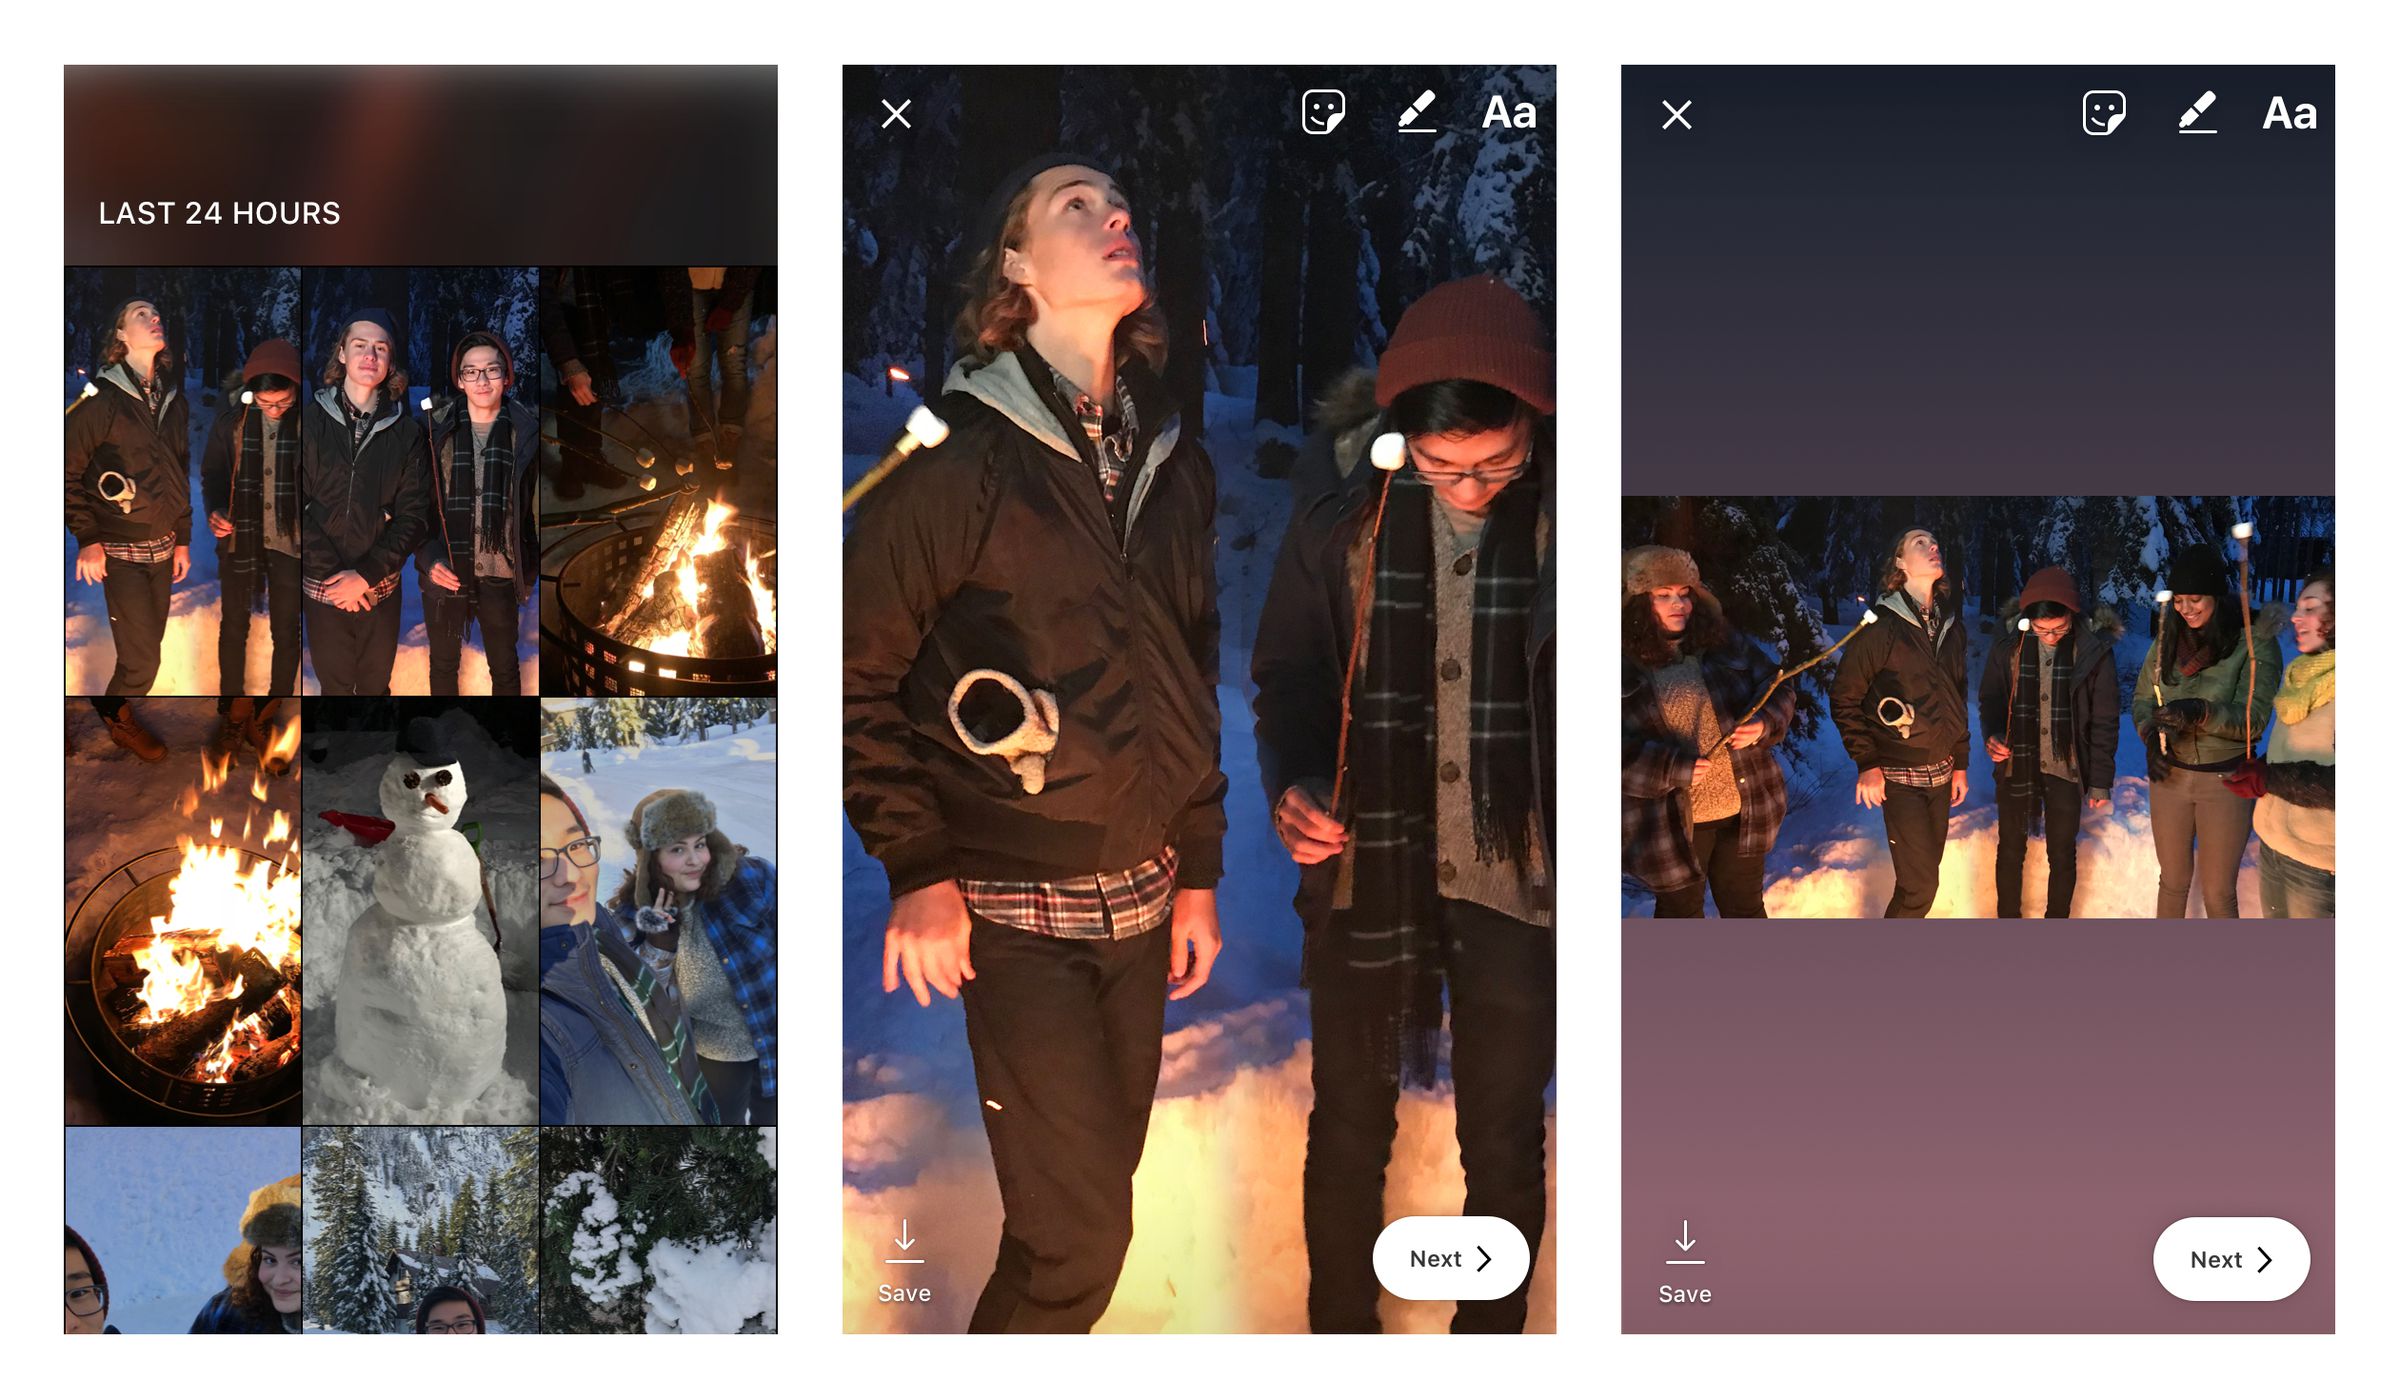 Instagram will soon let users upload photos and videos of any size to Stories.